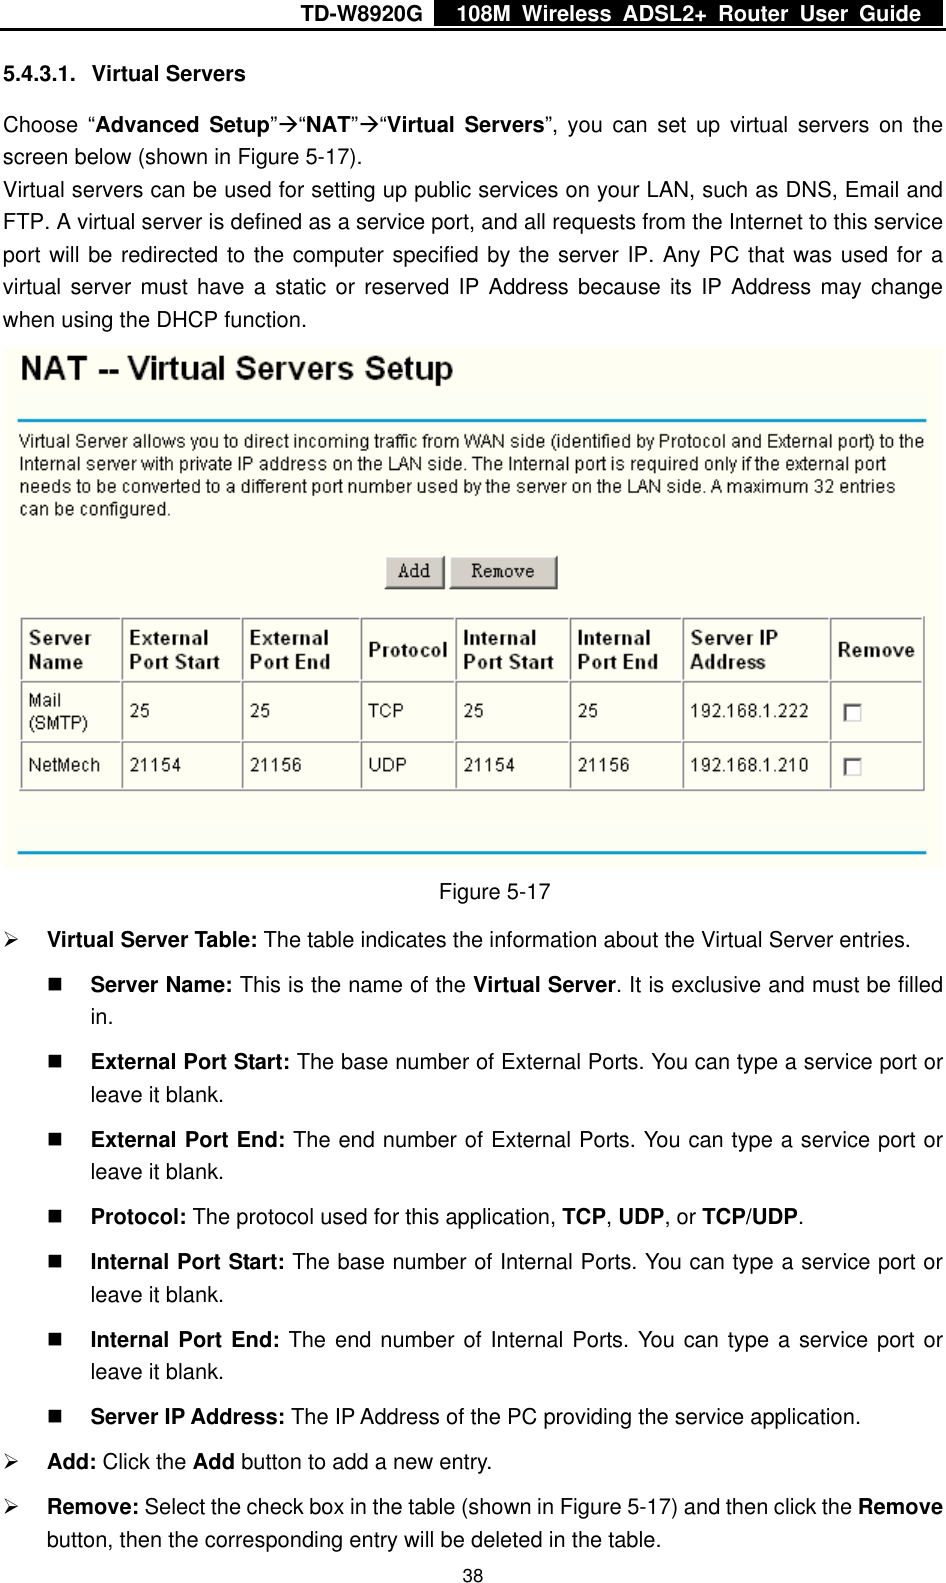 TD-W8920G    108M Wireless ADSL2+ Router User Guide    385.4.3.1. Virtual Servers Choose “Advanced Setup”Æ“NAT”Æ“Virtual Servers”, you can set up virtual servers on the screen below (shown in Figure 5-17). Virtual servers can be used for setting up public services on your LAN, such as DNS, Email and FTP. A virtual server is defined as a service port, and all requests from the Internet to this service port will be redirected to the computer specified by the server IP. Any PC that was used for a virtual server must have a static or reserved IP Address because its IP Address may change when using the DHCP function.  Figure 5-17 ¾ Virtual Server Table: The table indicates the information about the Virtual Server entries.  Server Name: This is the name of the Virtual Server. It is exclusive and must be filled in.  External Port Start: The base number of External Ports. You can type a service port or leave it blank.  External Port End: The end number of External Ports. You can type a service port or leave it blank.  Protocol: The protocol used for this application, TCP, UDP, or TCP/UDP.  Internal Port Start: The base number of Internal Ports. You can type a service port or leave it blank.  Internal Port End: The end number of Internal Ports. You can type a service port or leave it blank.  Server IP Address: The IP Address of the PC providing the service application. ¾ Add: Click the Add button to add a new entry. ¾ Remove: Select the check box in the table (shown in Figure 5-17) and then click the Remove button, then the corresponding entry will be deleted in the table. 